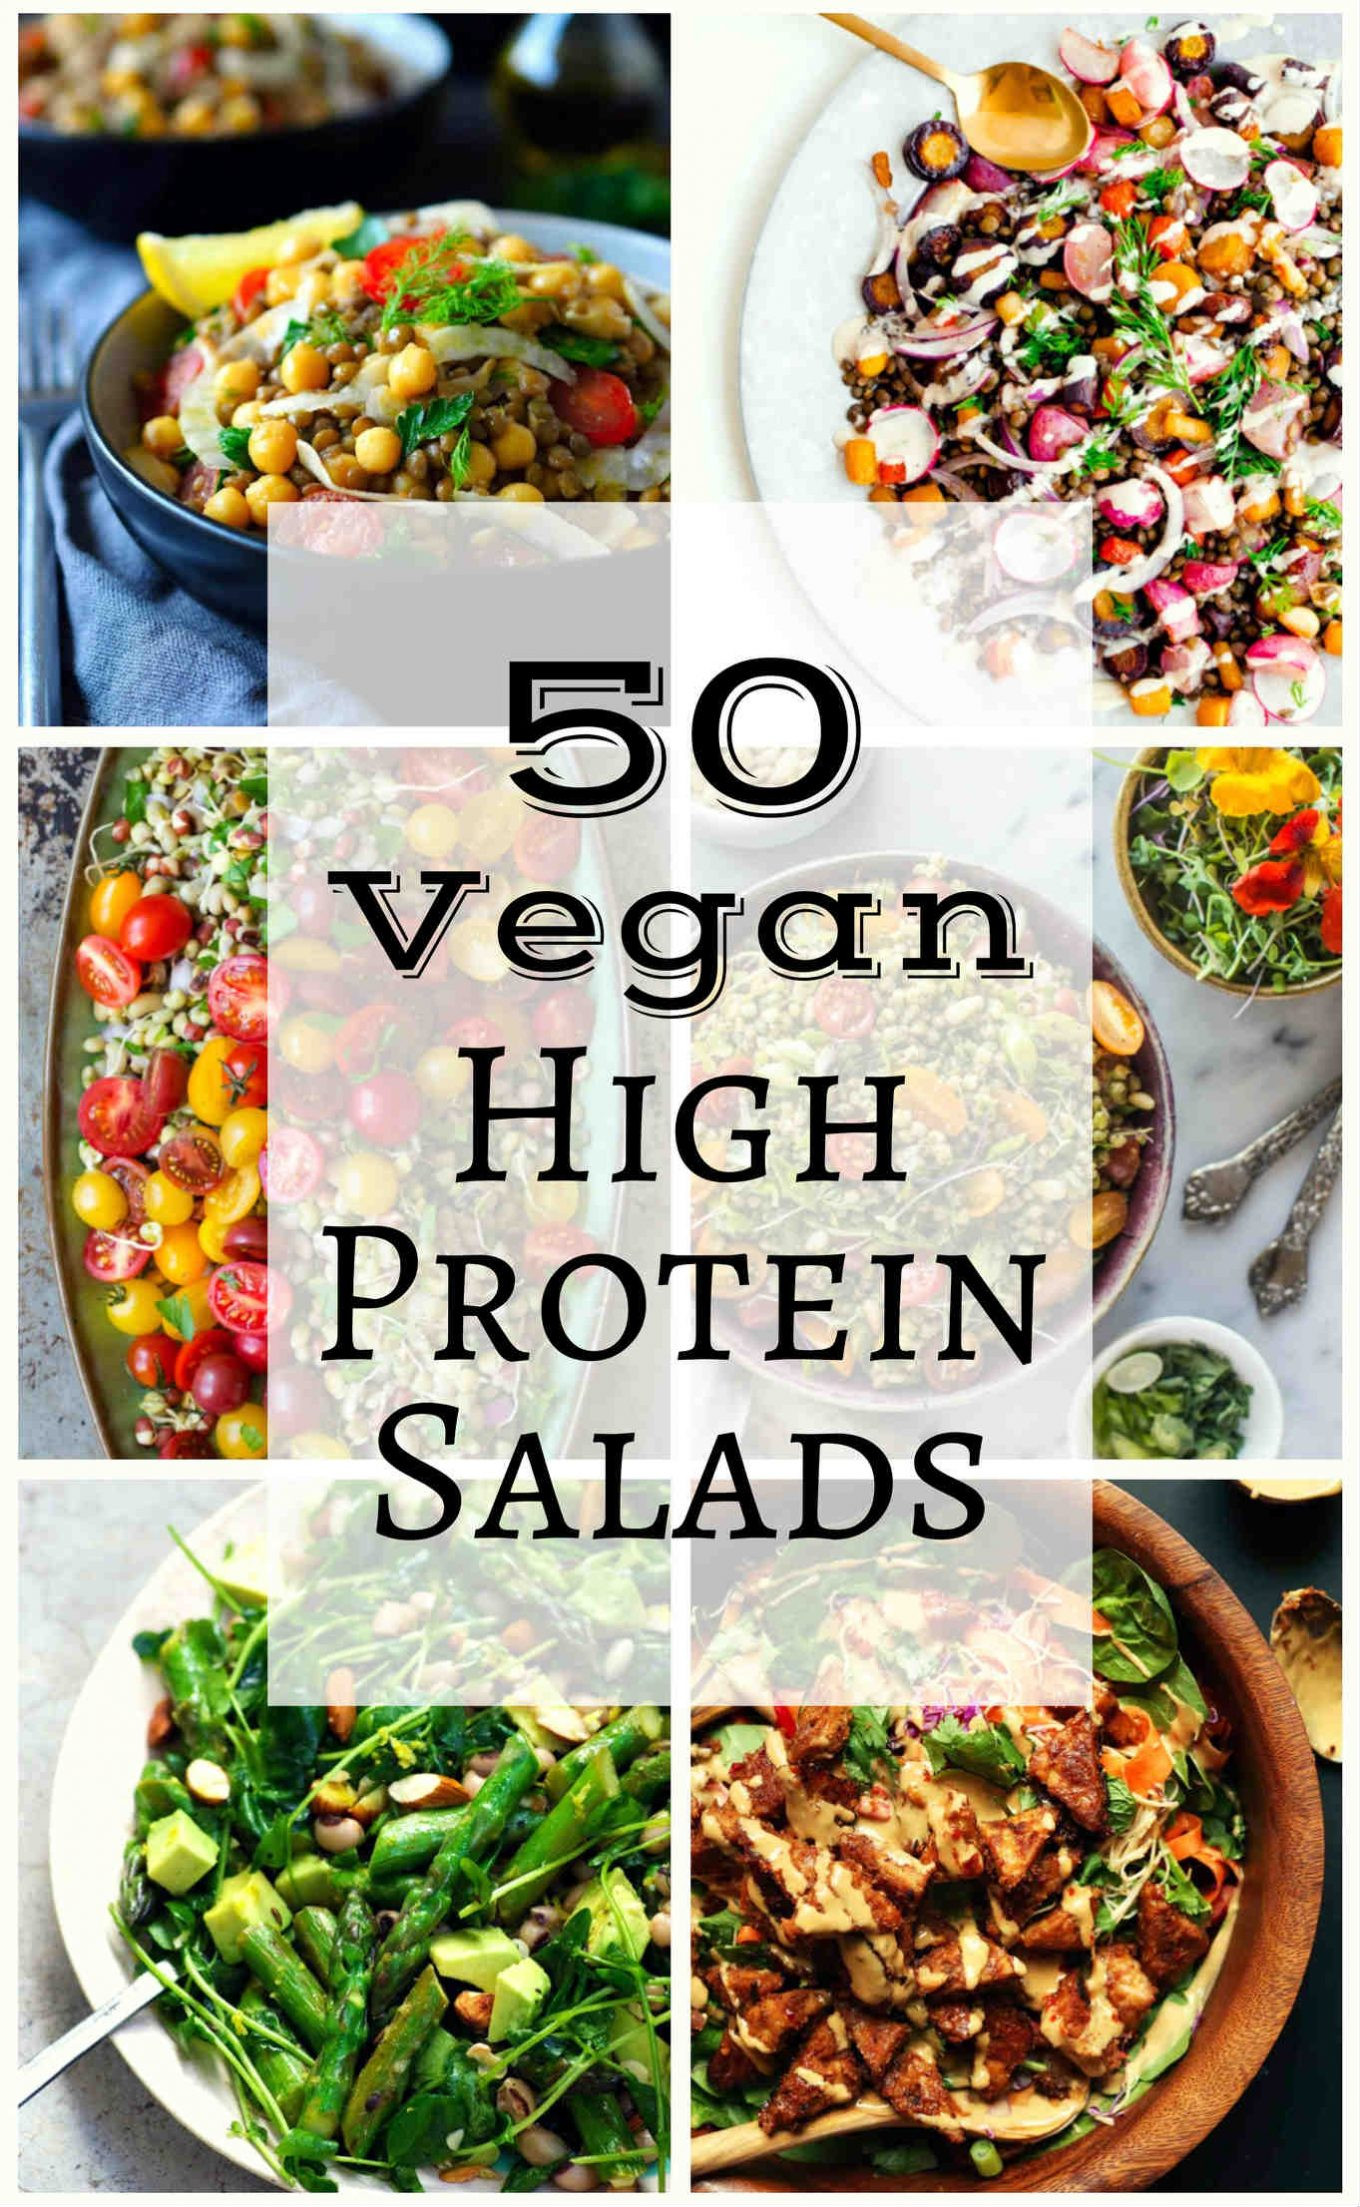 Protein Options For Vegetarian
 50 Vegan High Protein Salads